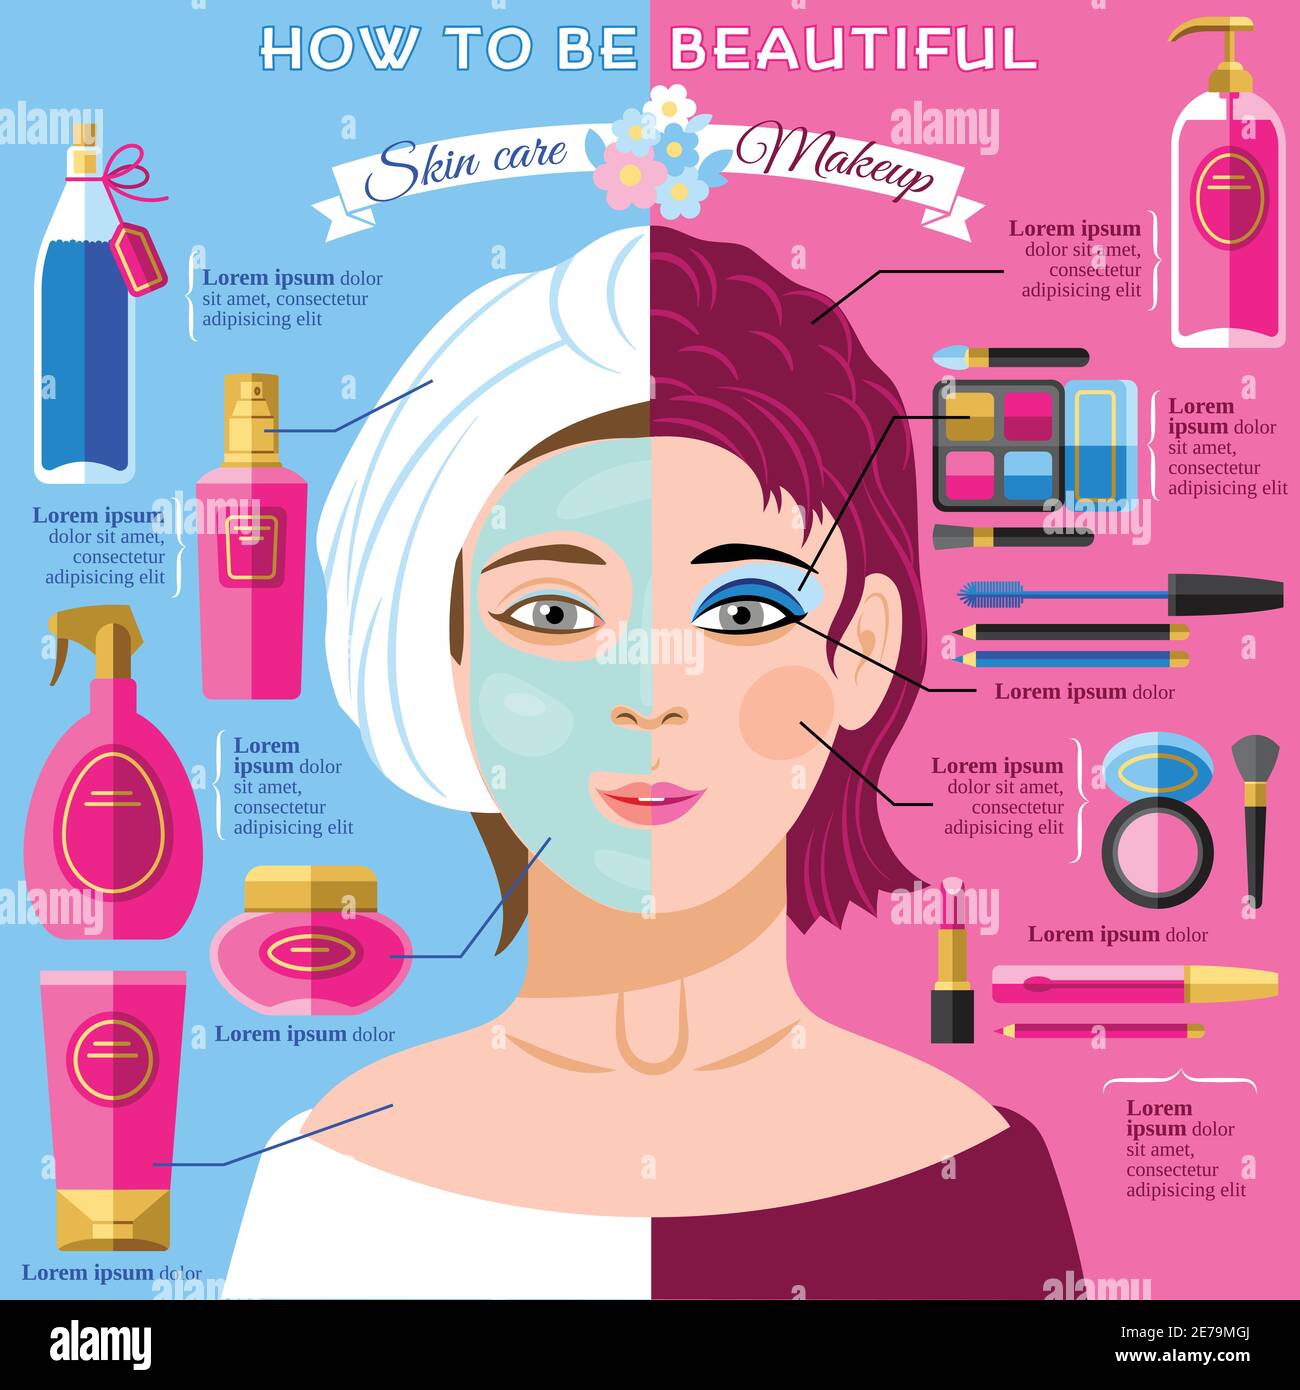 Skincare and makeup tips for healthy face skin and beauty infographic poster with pictograms abstract vector  illustration Stock Vector